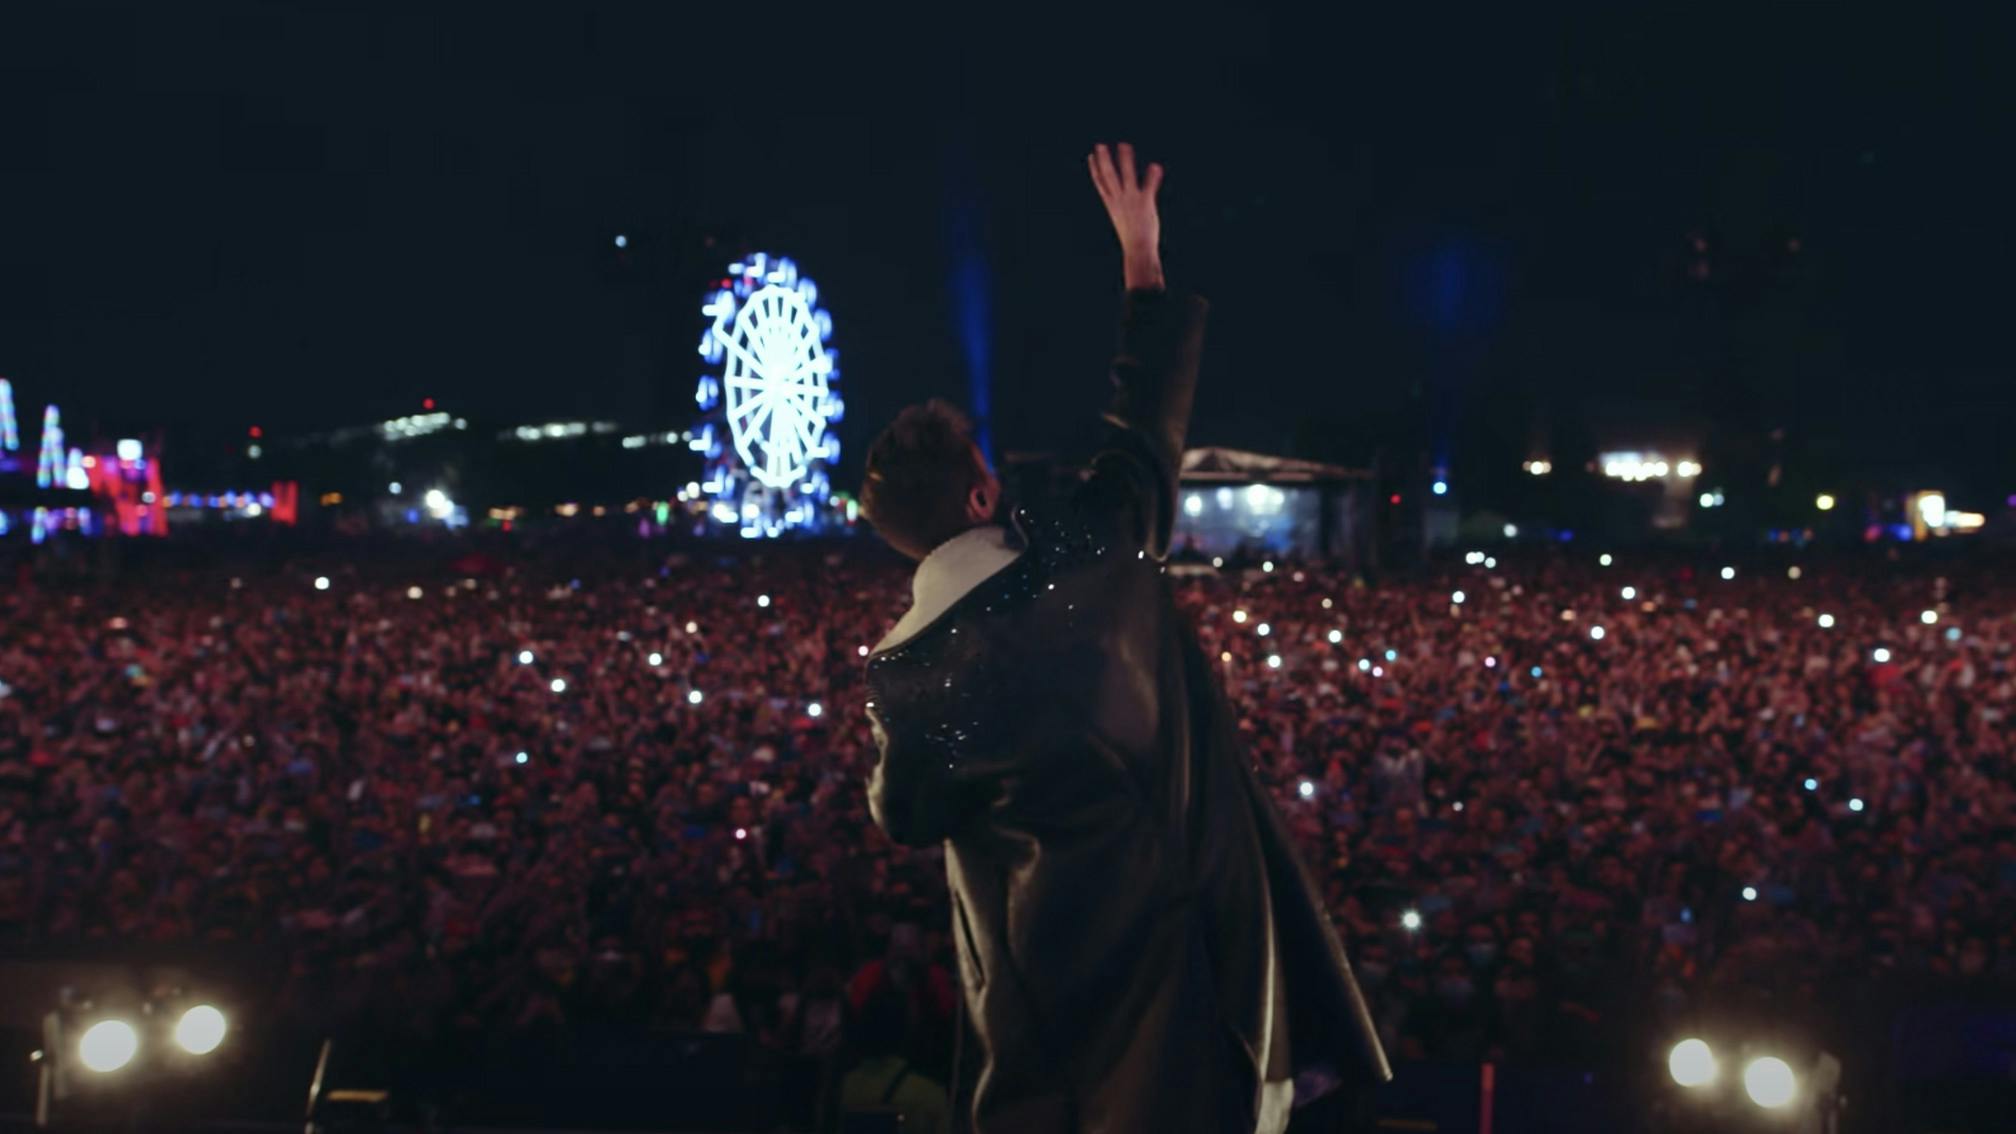 Watch twenty one pilots’ new live video for The Outside